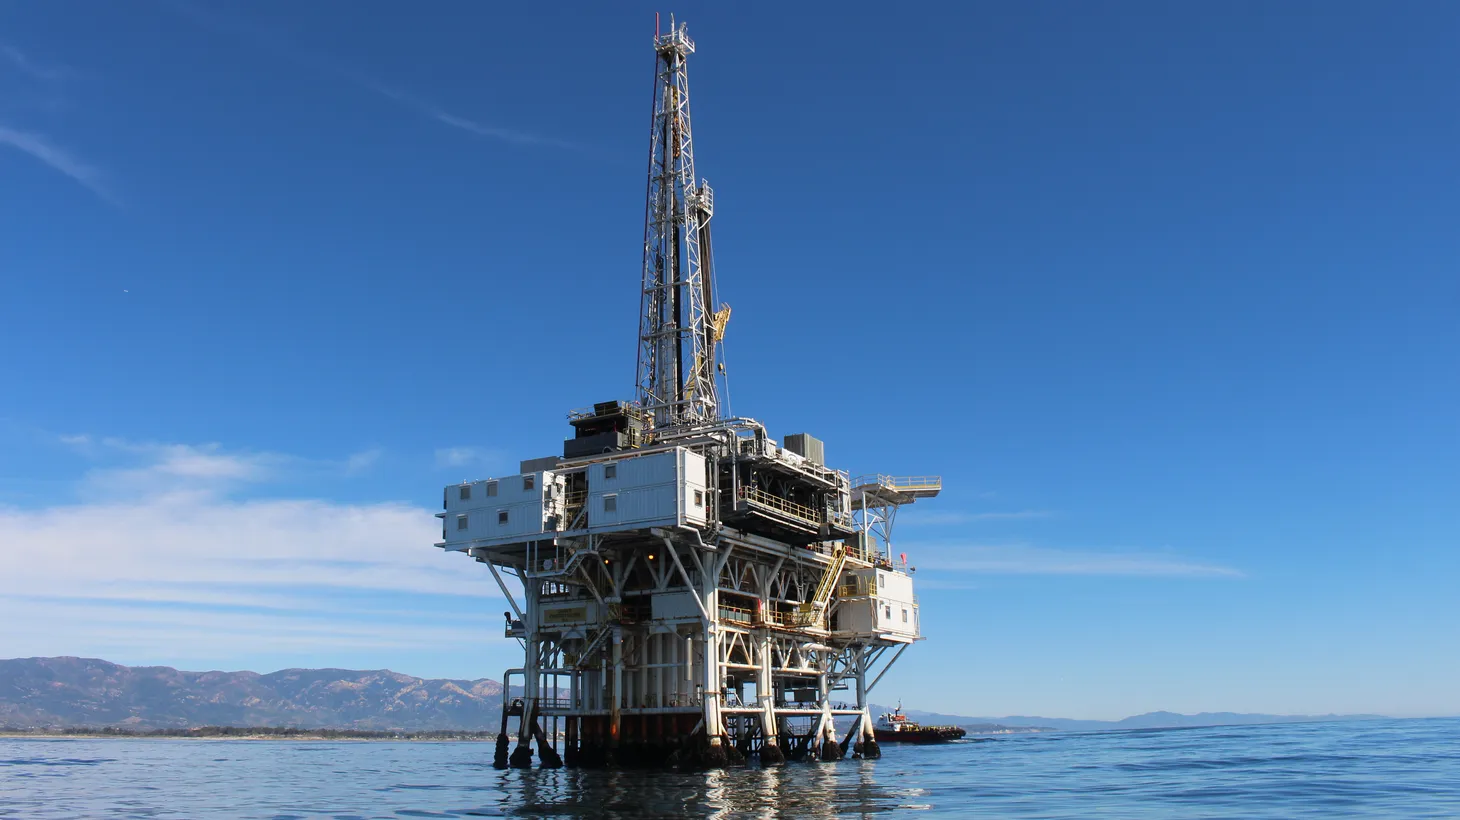 Platform Holly is one of eight oil platforms off Santa Barbara and Ventura set to be decommissioned in the next decade, which means the oil wells will be plugged and abandoned. The fate of the structures themselves, however, is undecided.